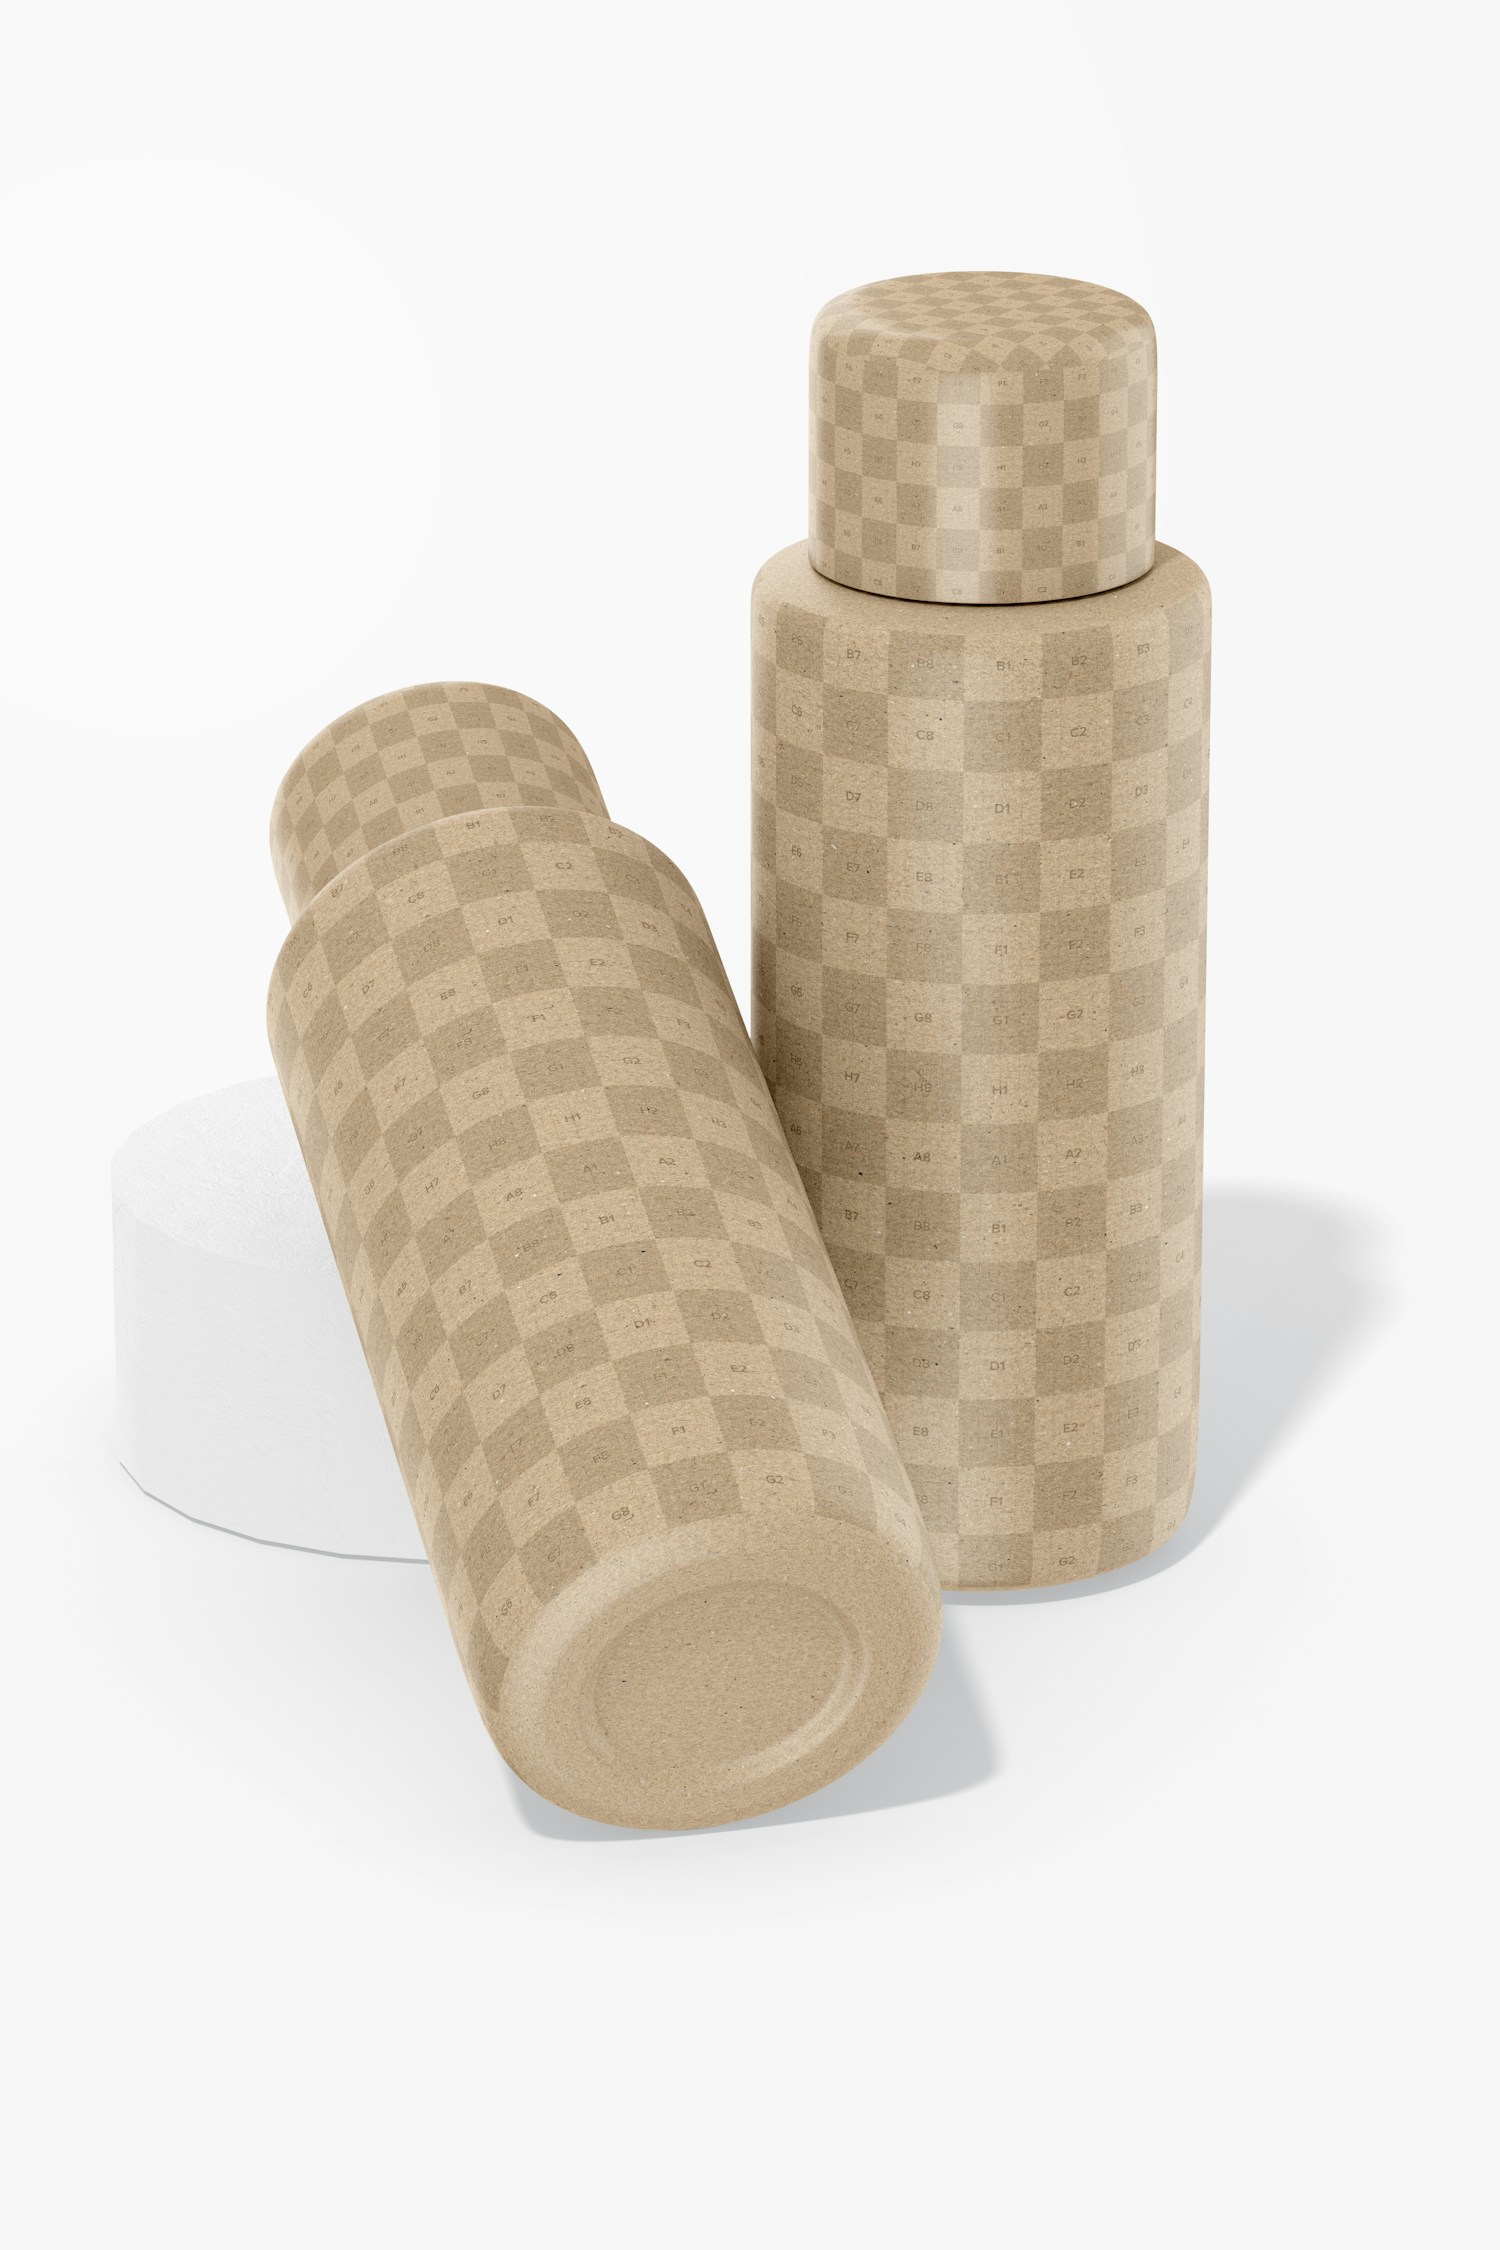 500 ml Cardboard Bottles Mockup, Standing and Dropped